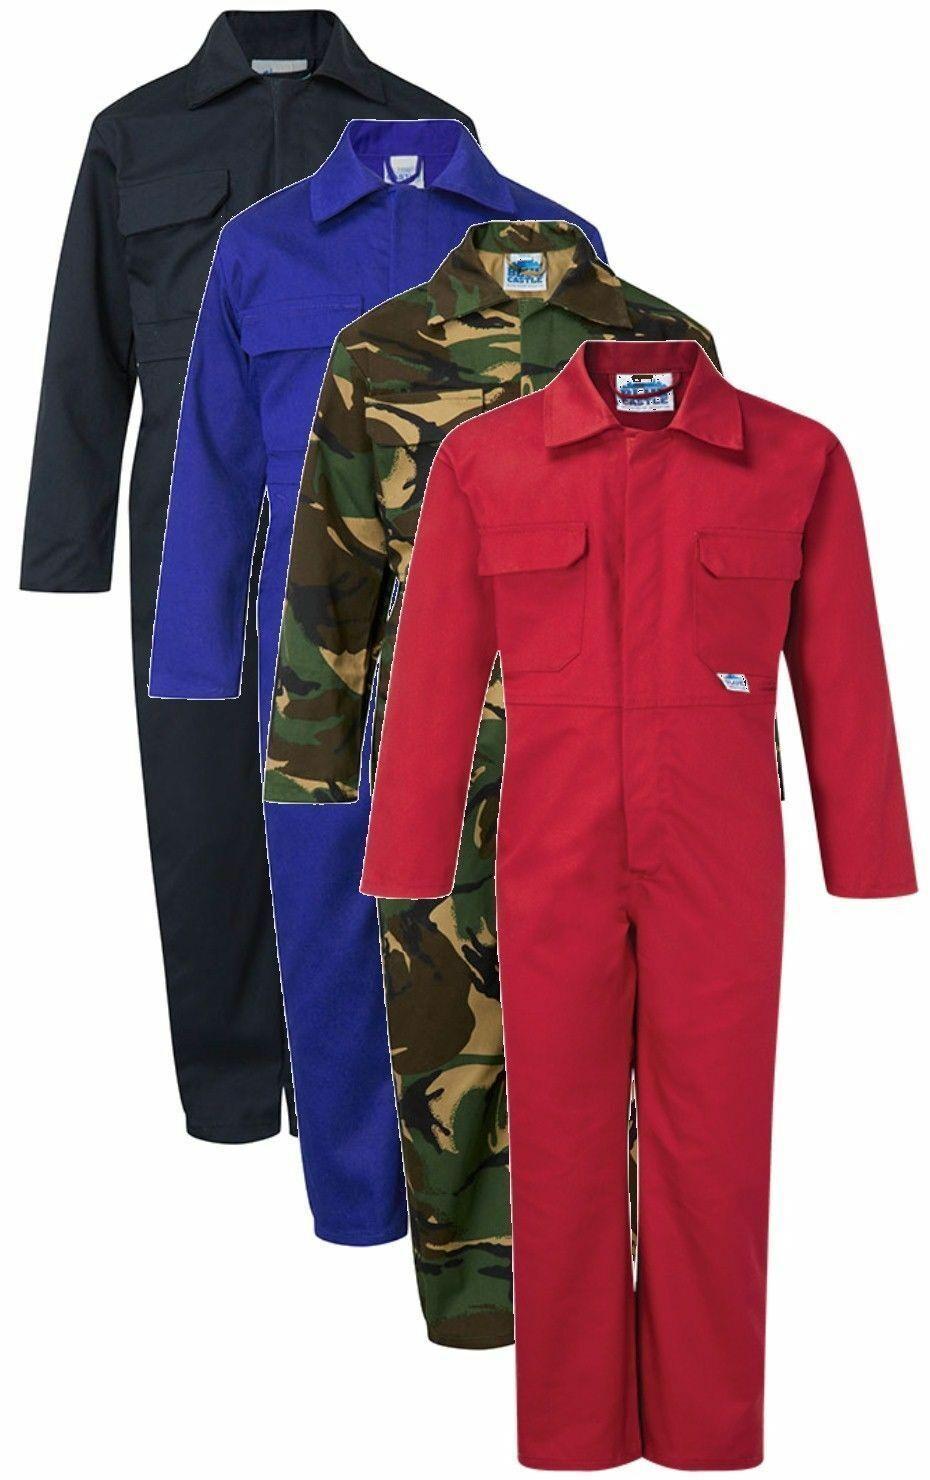 Fort kids junior childs childrens coverall work boilersuit #333